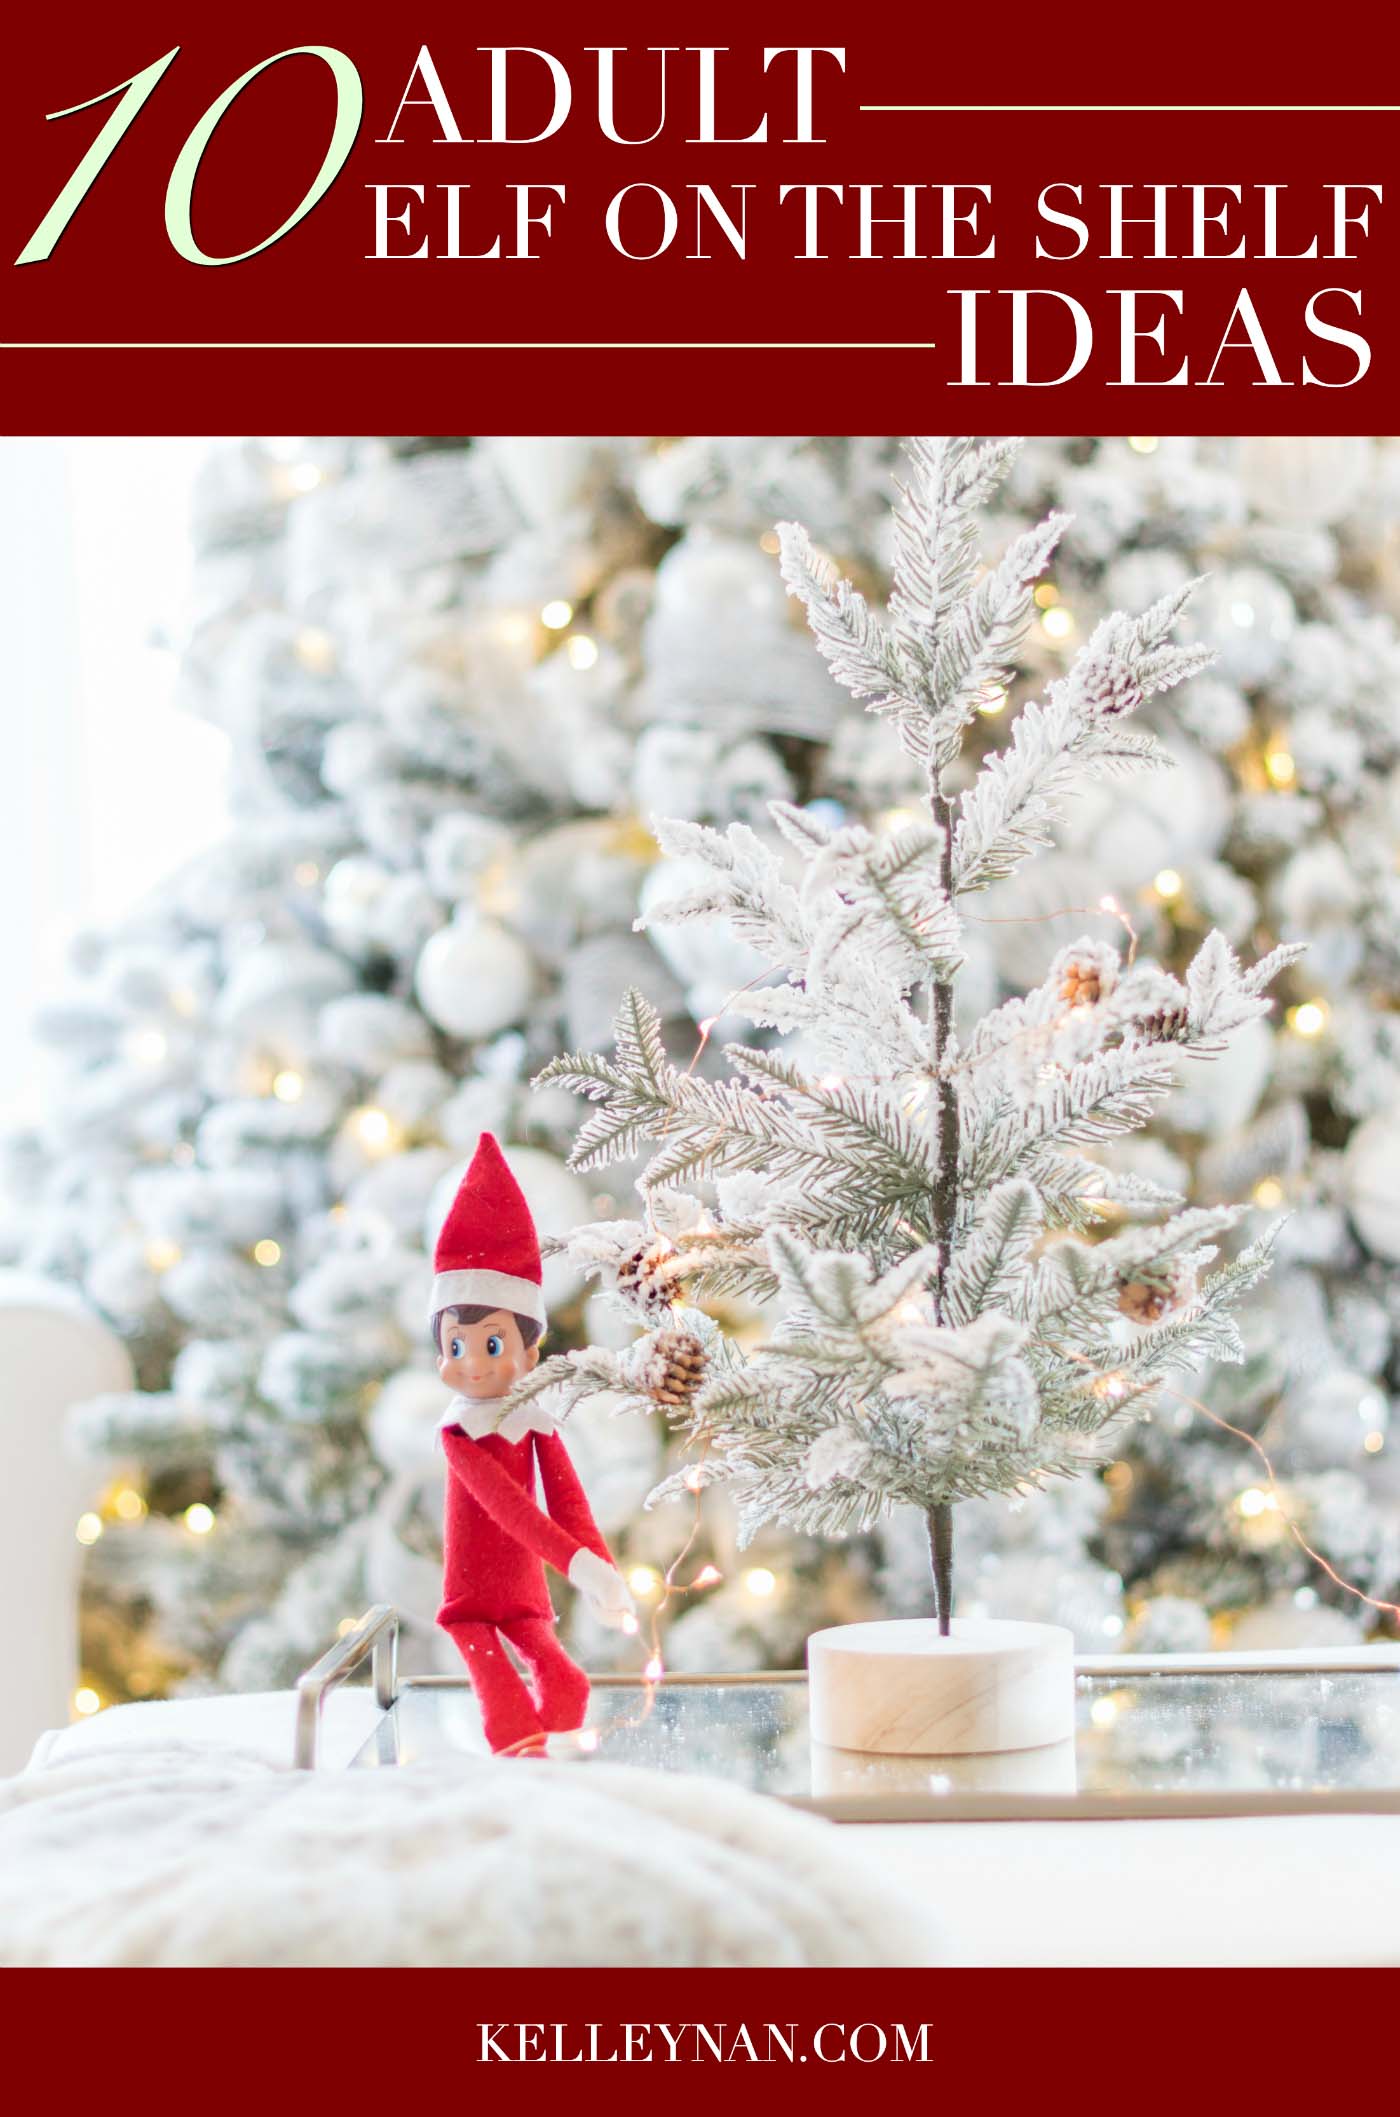 10 Adult Elf on the Shelf Ideas- Themed for husbands, wives, and friends!